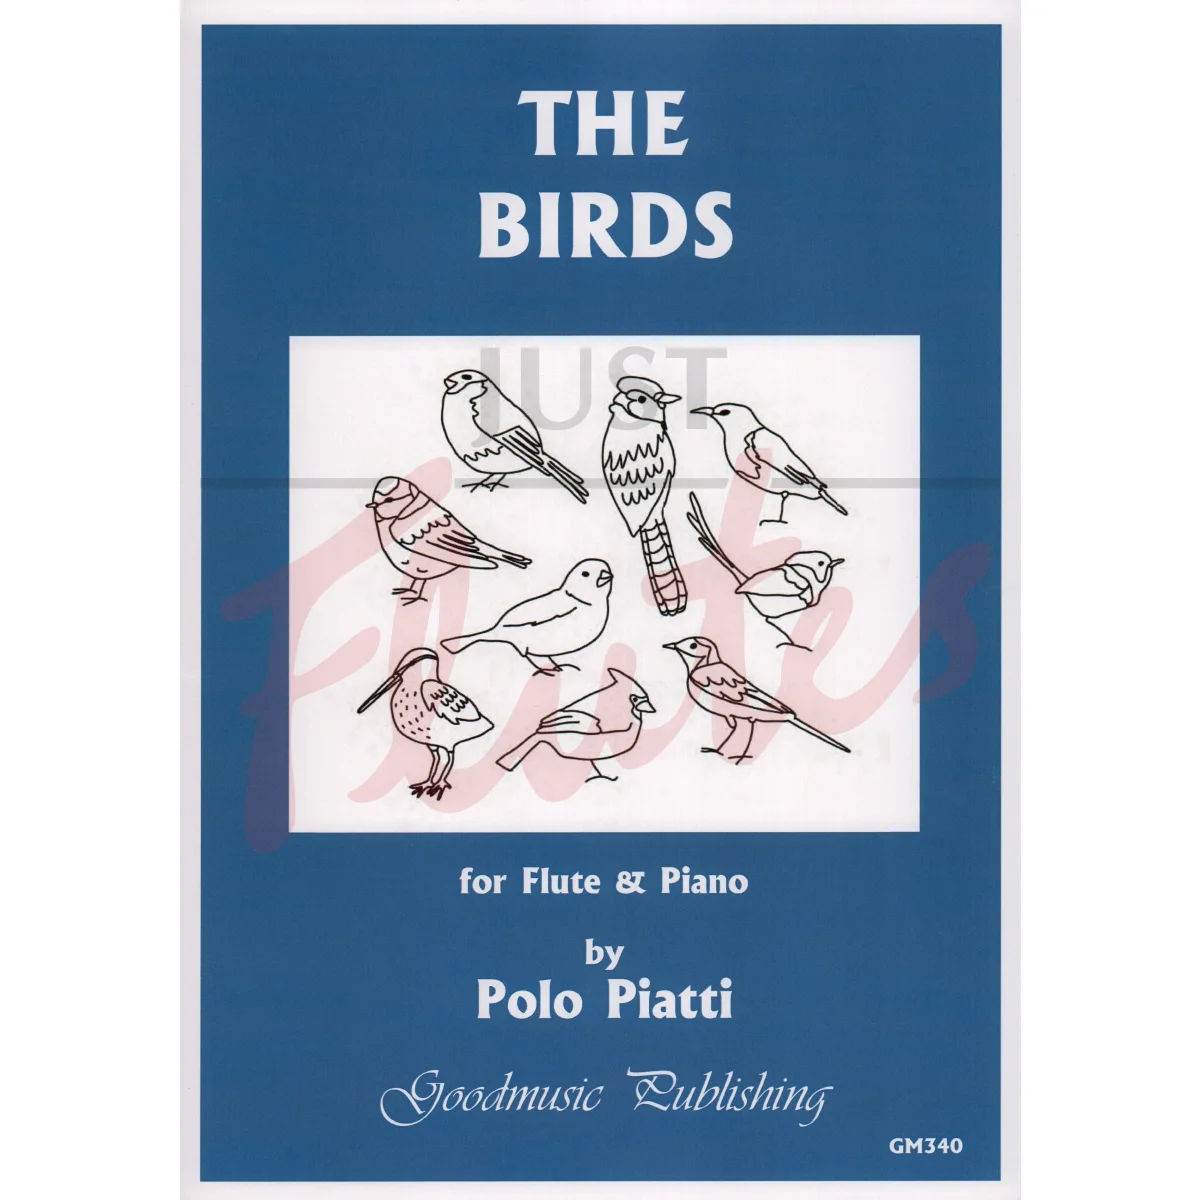 The Birds for Flute and Piano